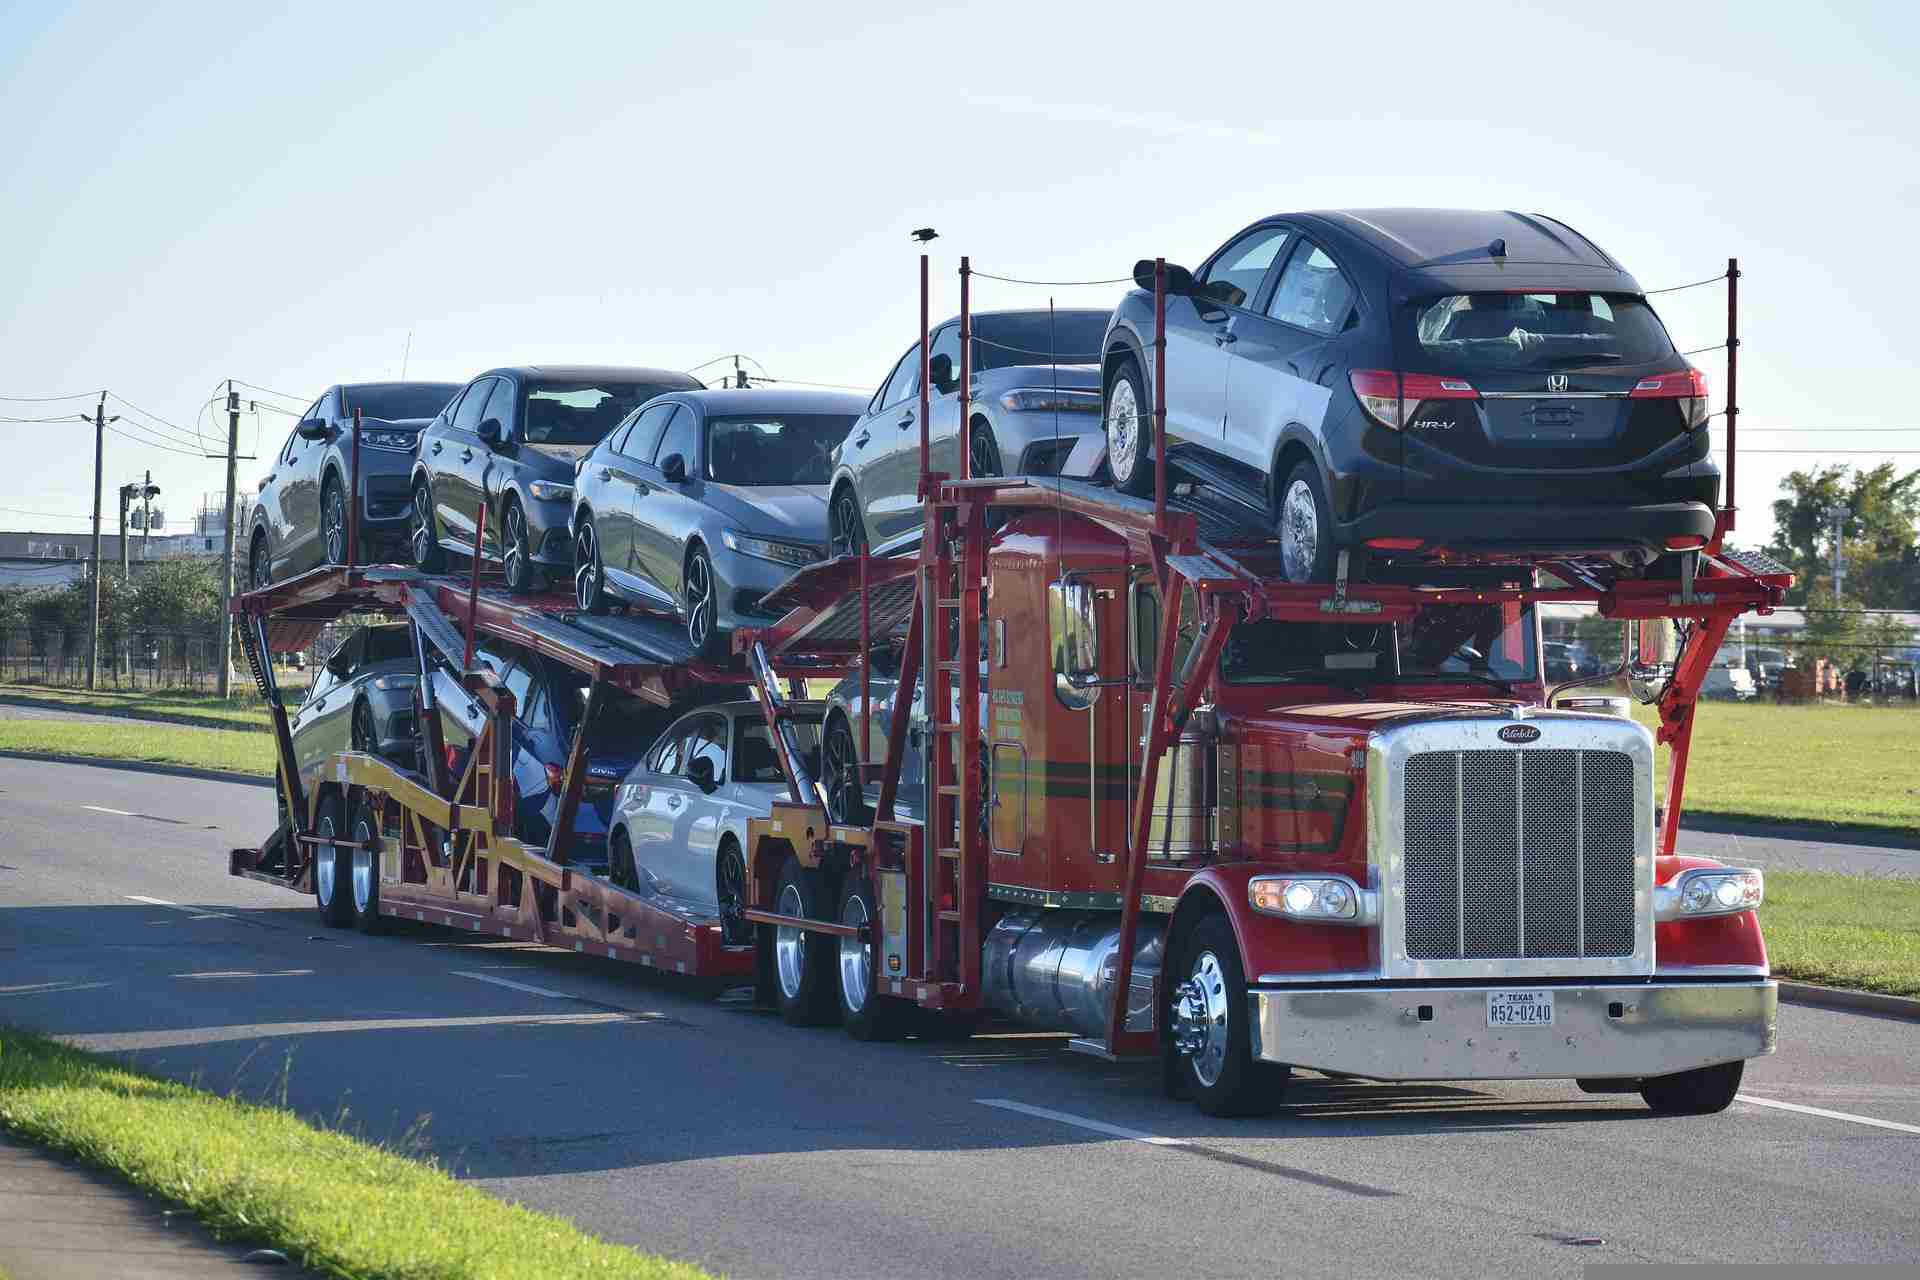 Reasons to Consider Ship a Car, Inc for Your Car Shipping